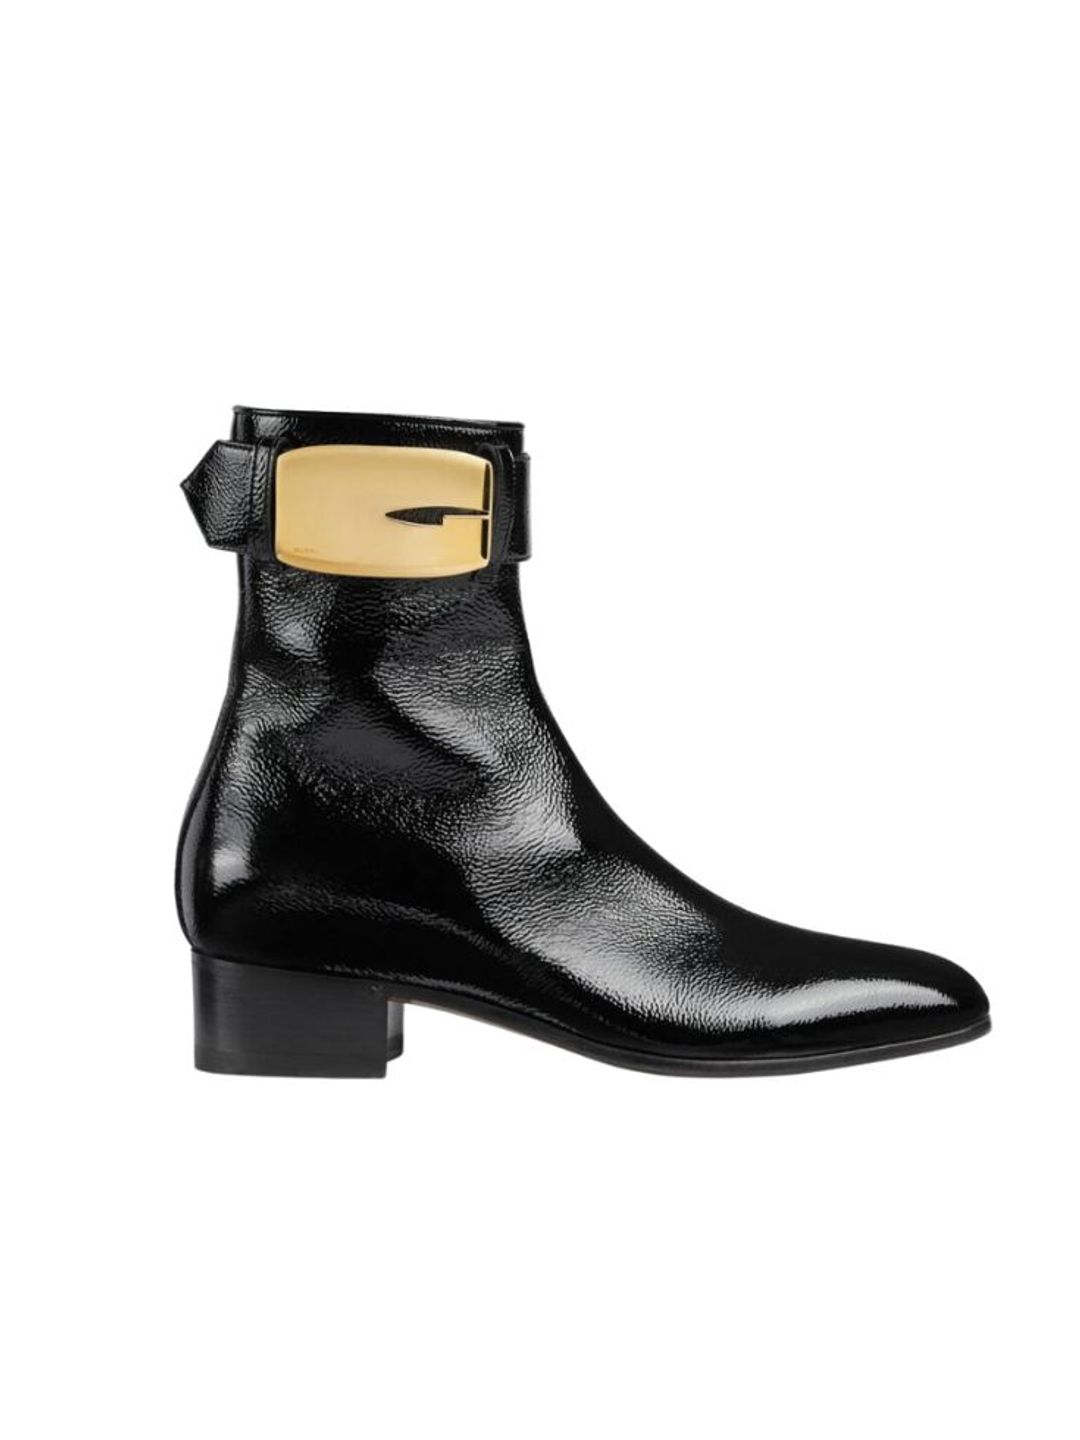 Shiny ankle boots with gold hardware 